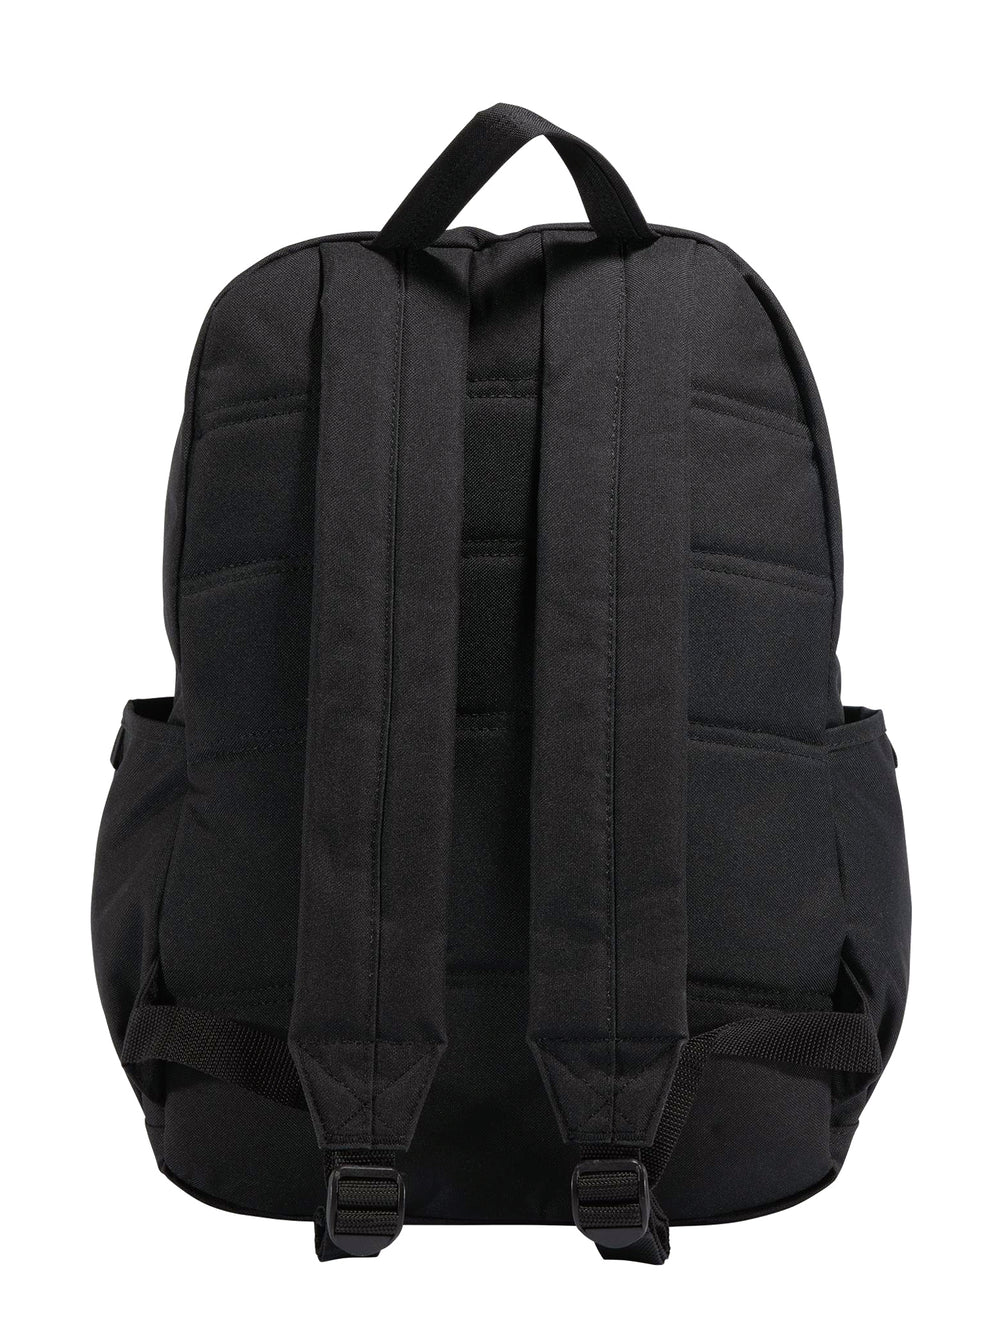 CARHARTT CLASSIC LAPTOP 25L BACKPACK | Boathouse Footwear Collective